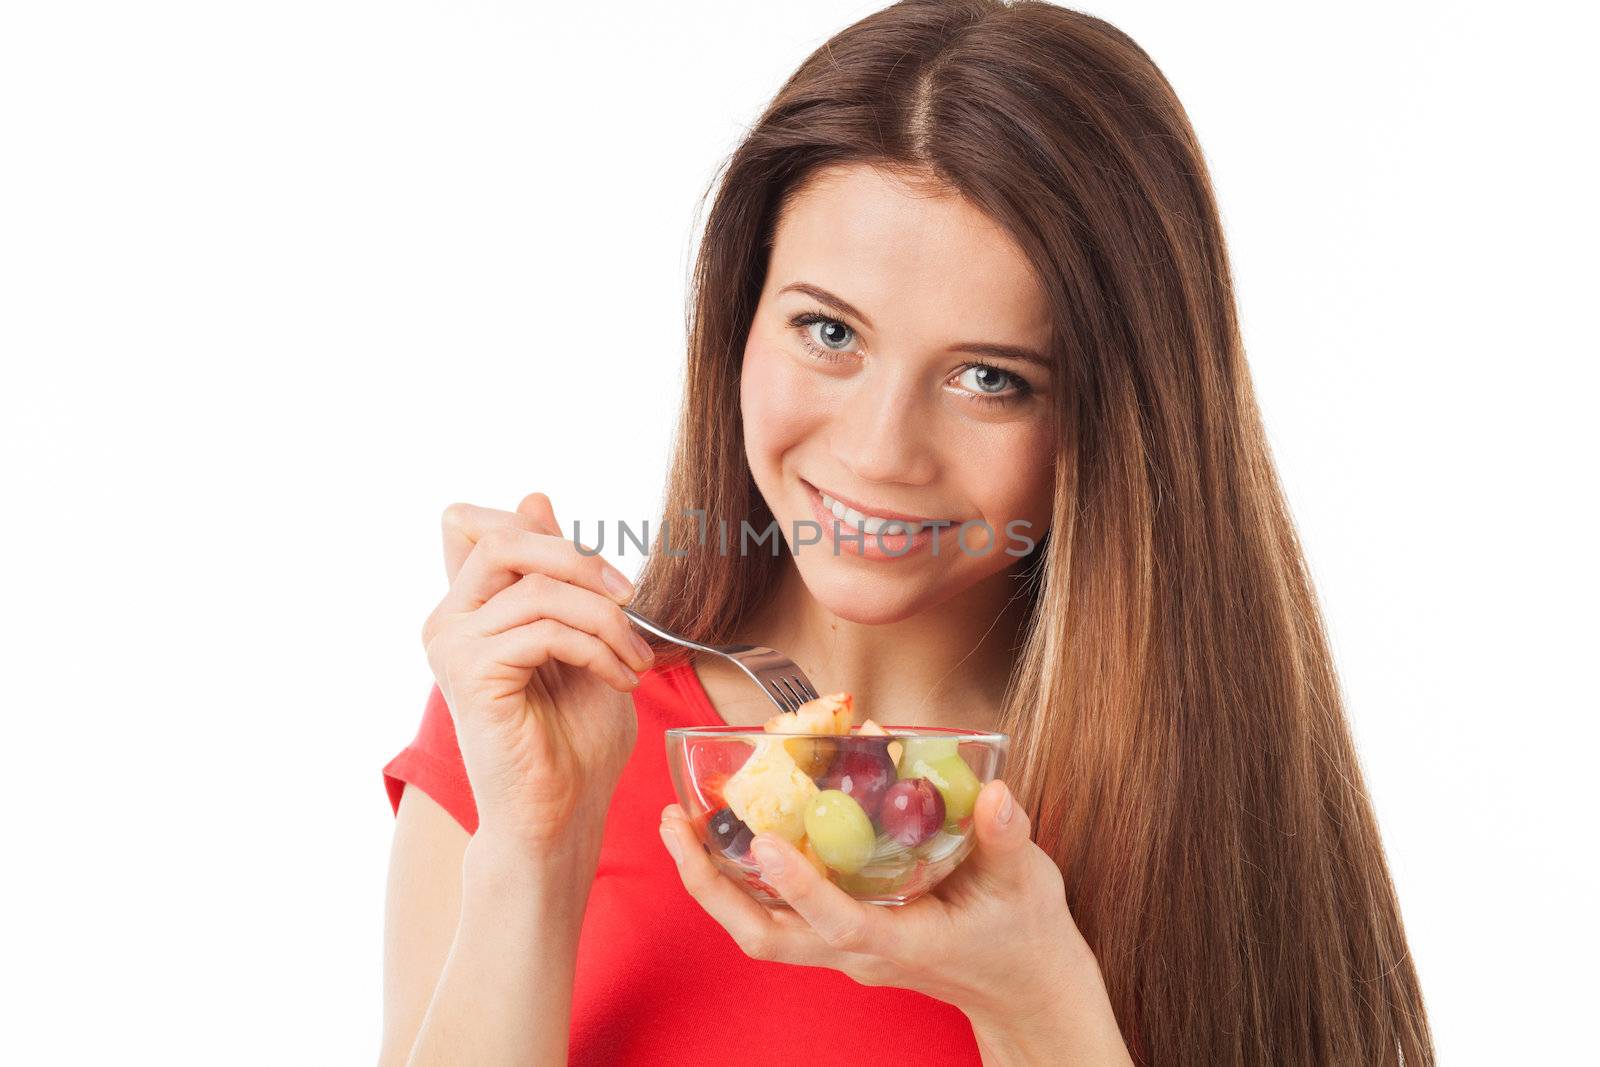 Young woman eating fruits and smiling, isolated on white